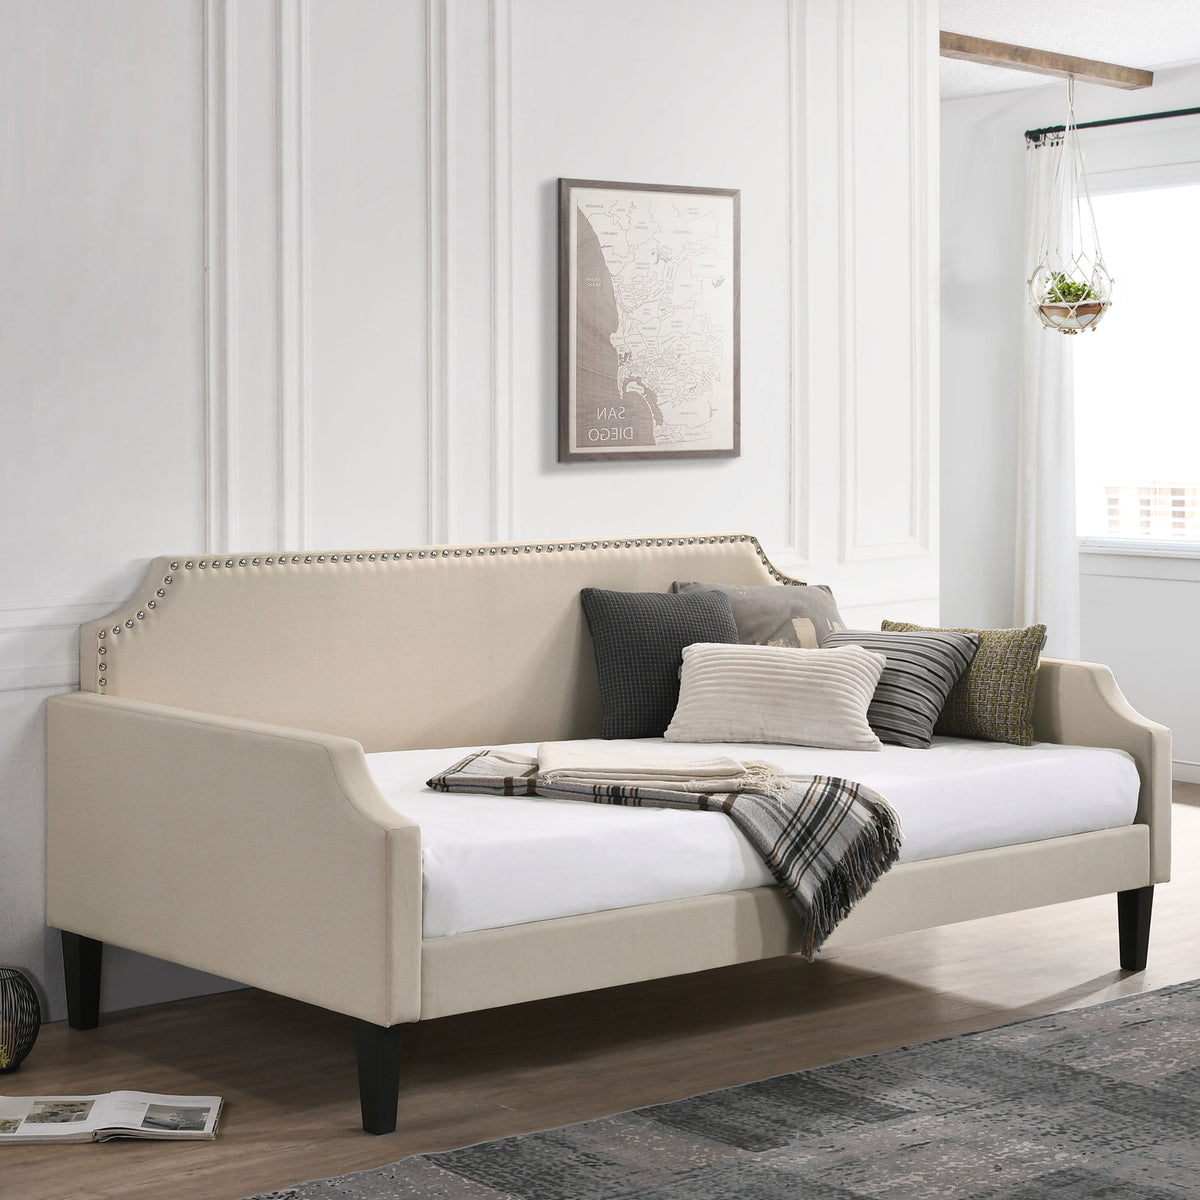 Olivia Upholstered Twin Daybed with Nailhead Trim Olivia Upholstered Twin Daybed with Nailhead Trim Half Price Furniture